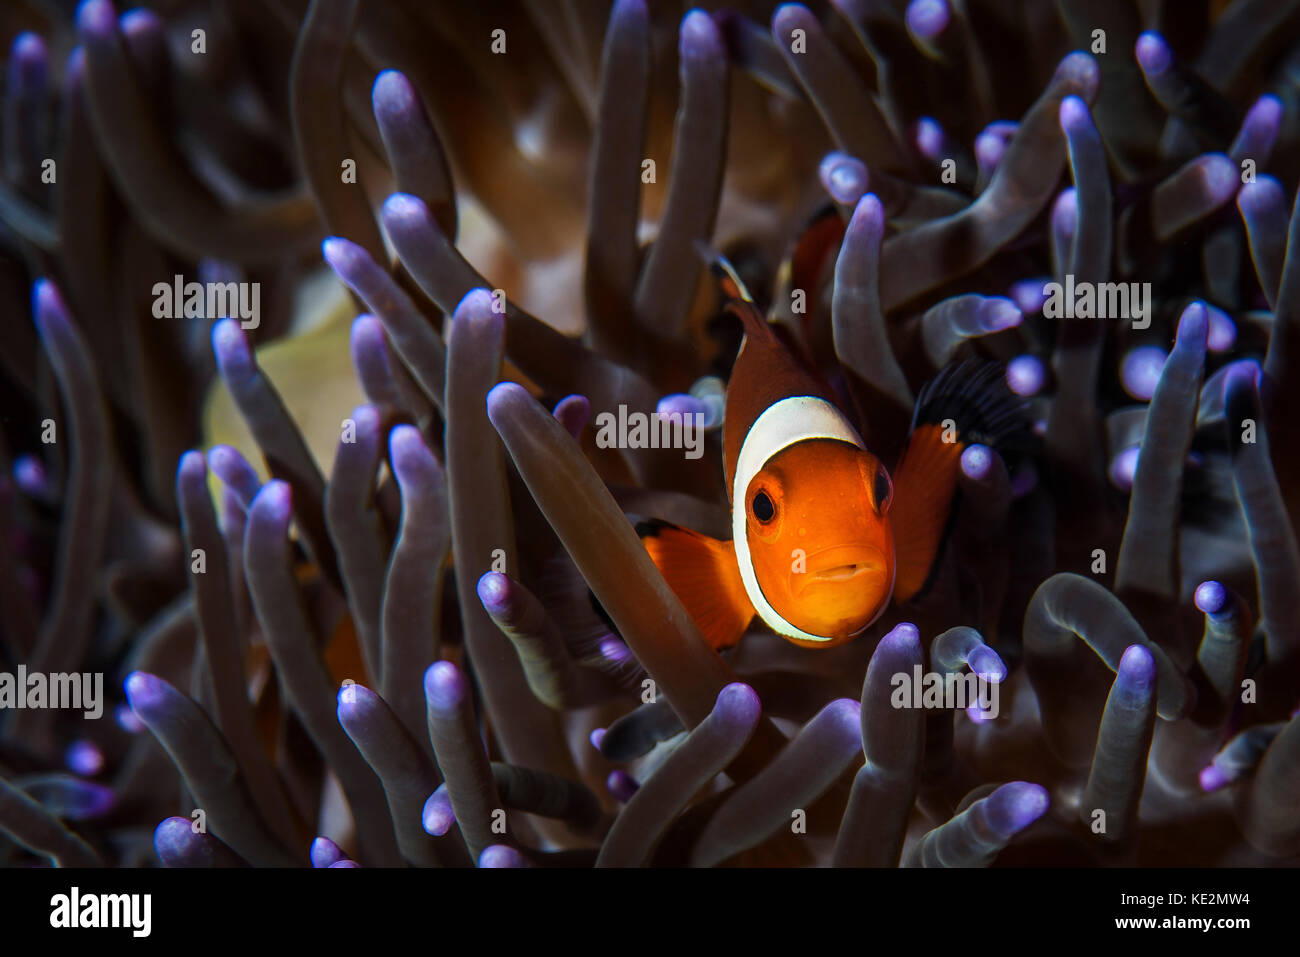 A clownfish in an anemone, North Sulawesi, Indonesia. Stock Photo